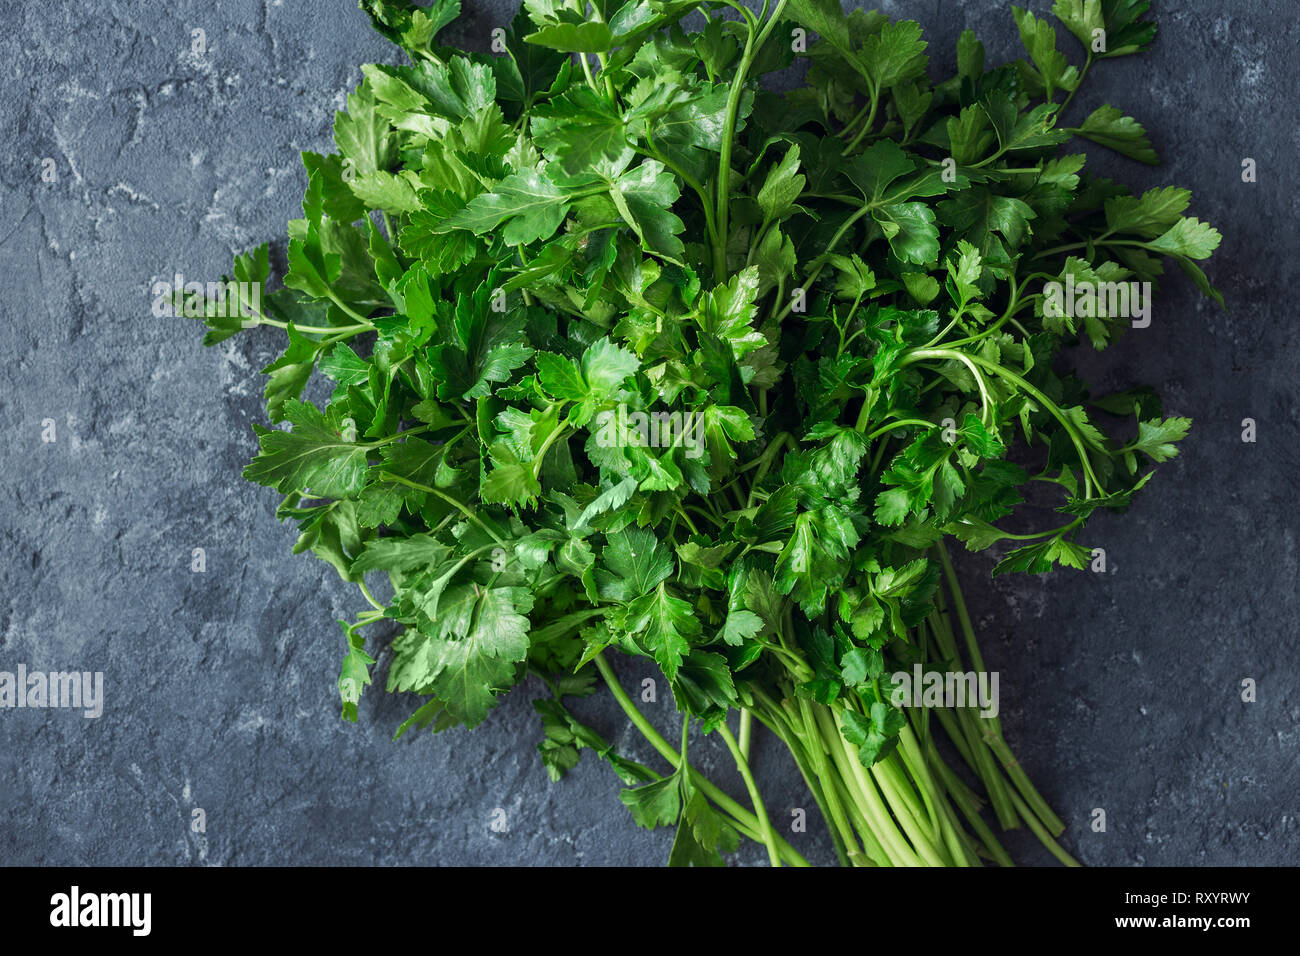 Bunch of parsley on dark stone background top view Stock Photo